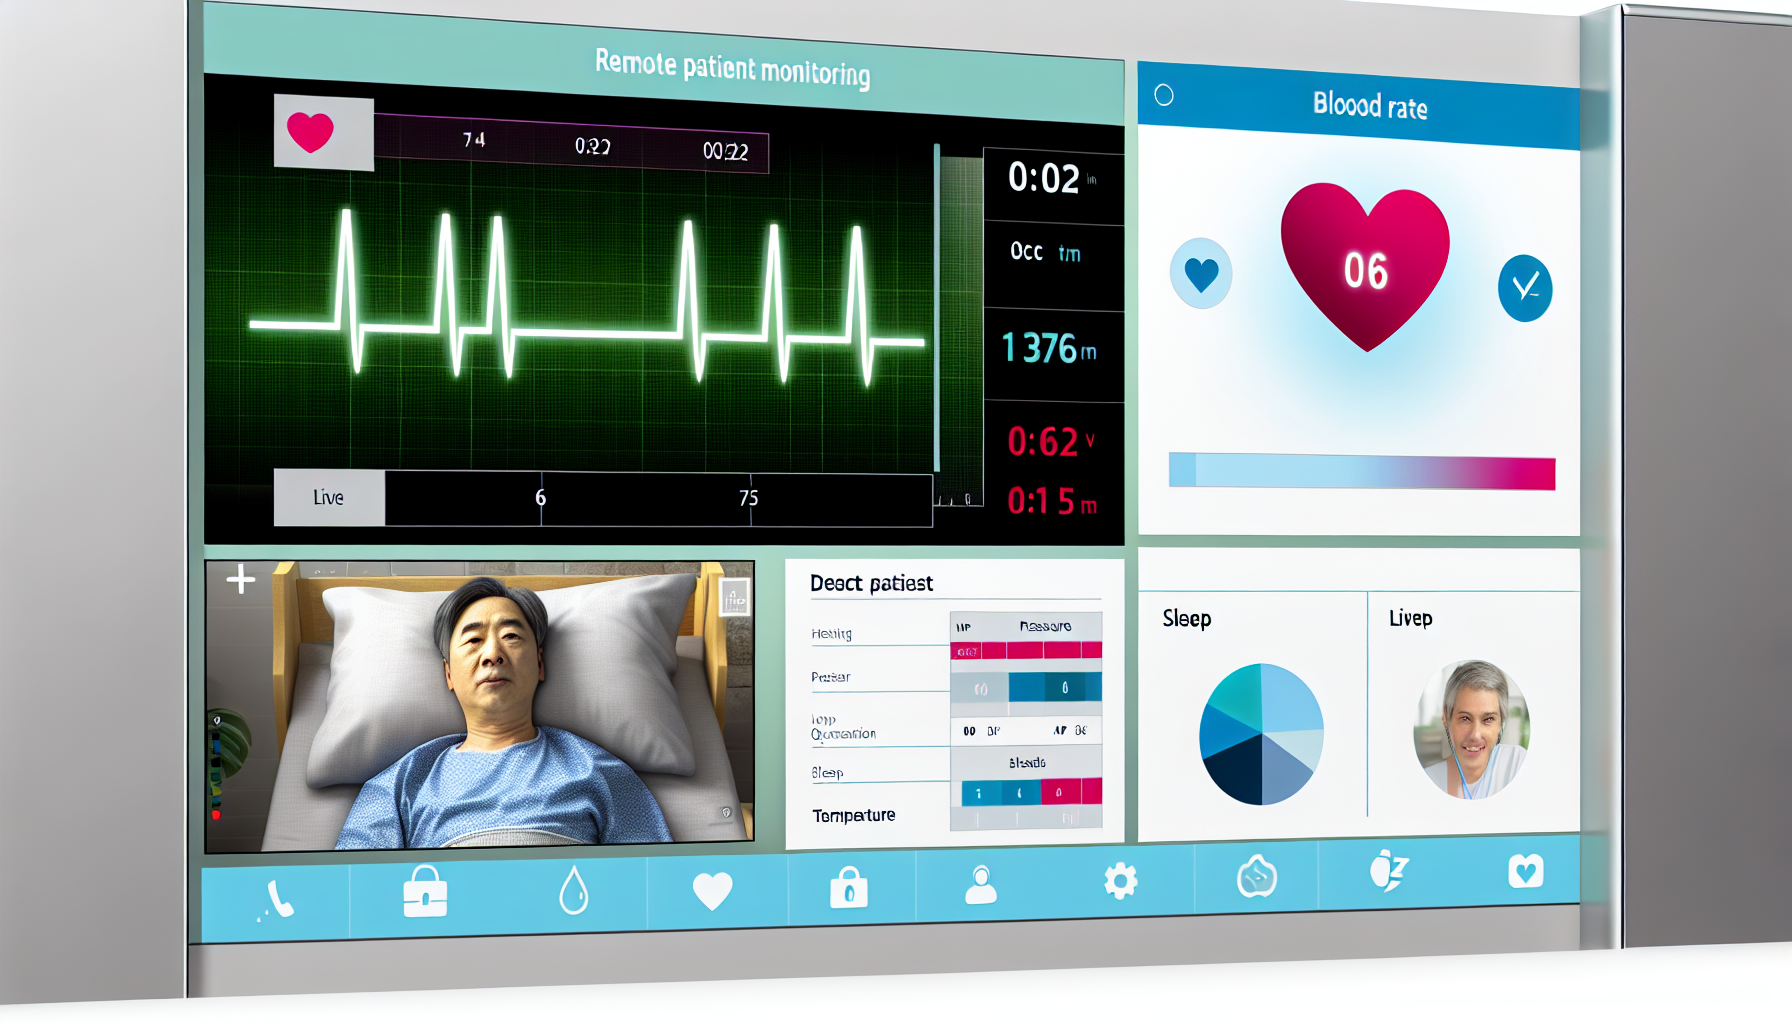 Remote Patient Monitoring Interface